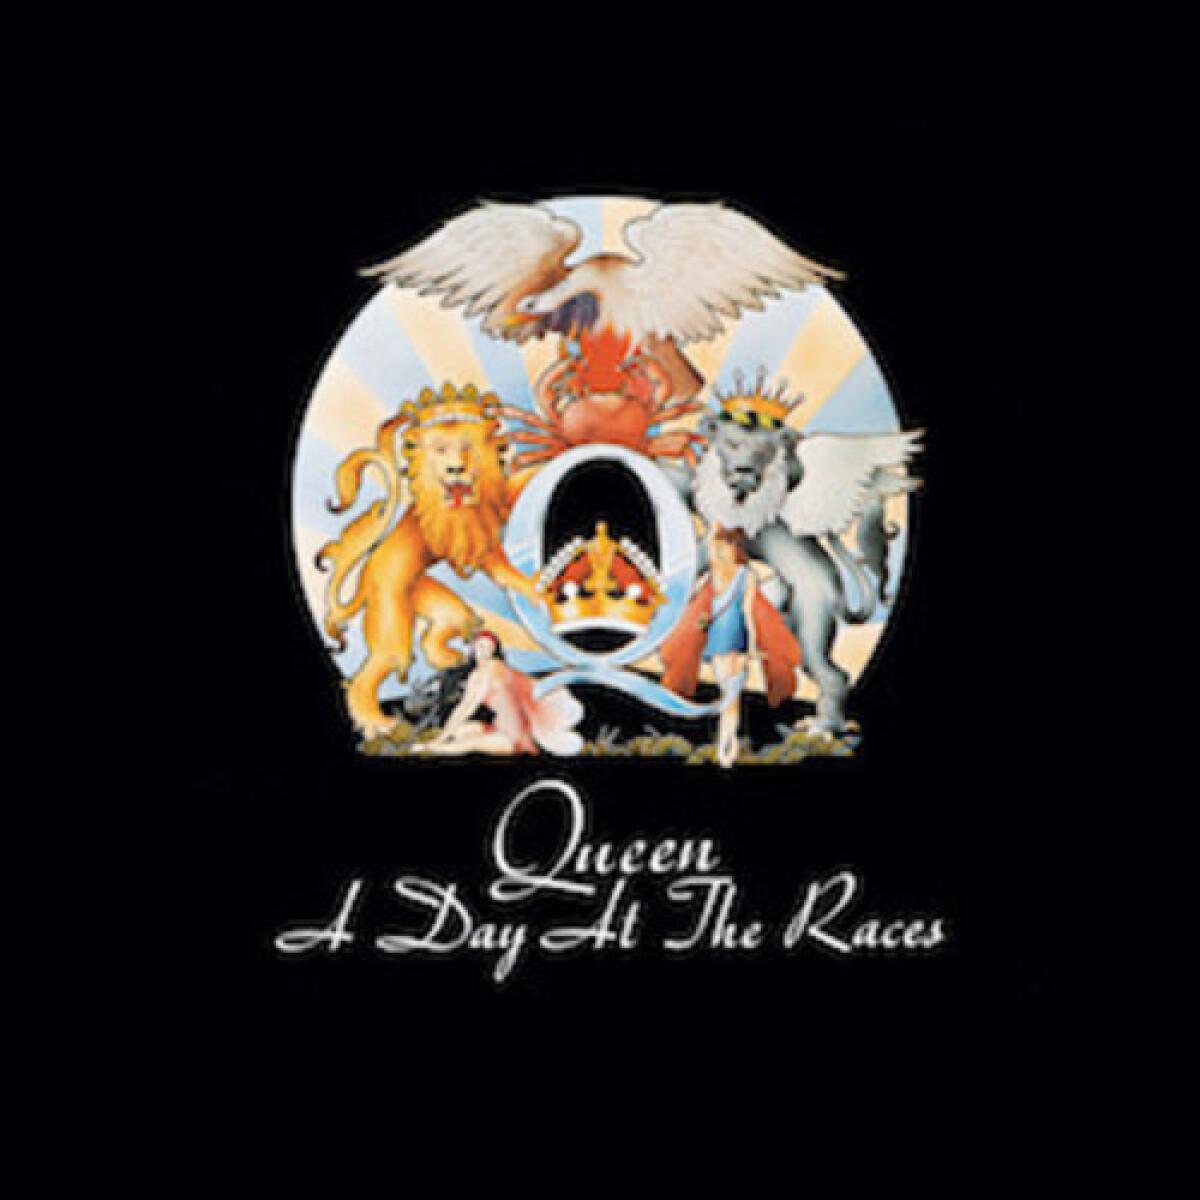 Queen-a Day At The Races - Vinilo 